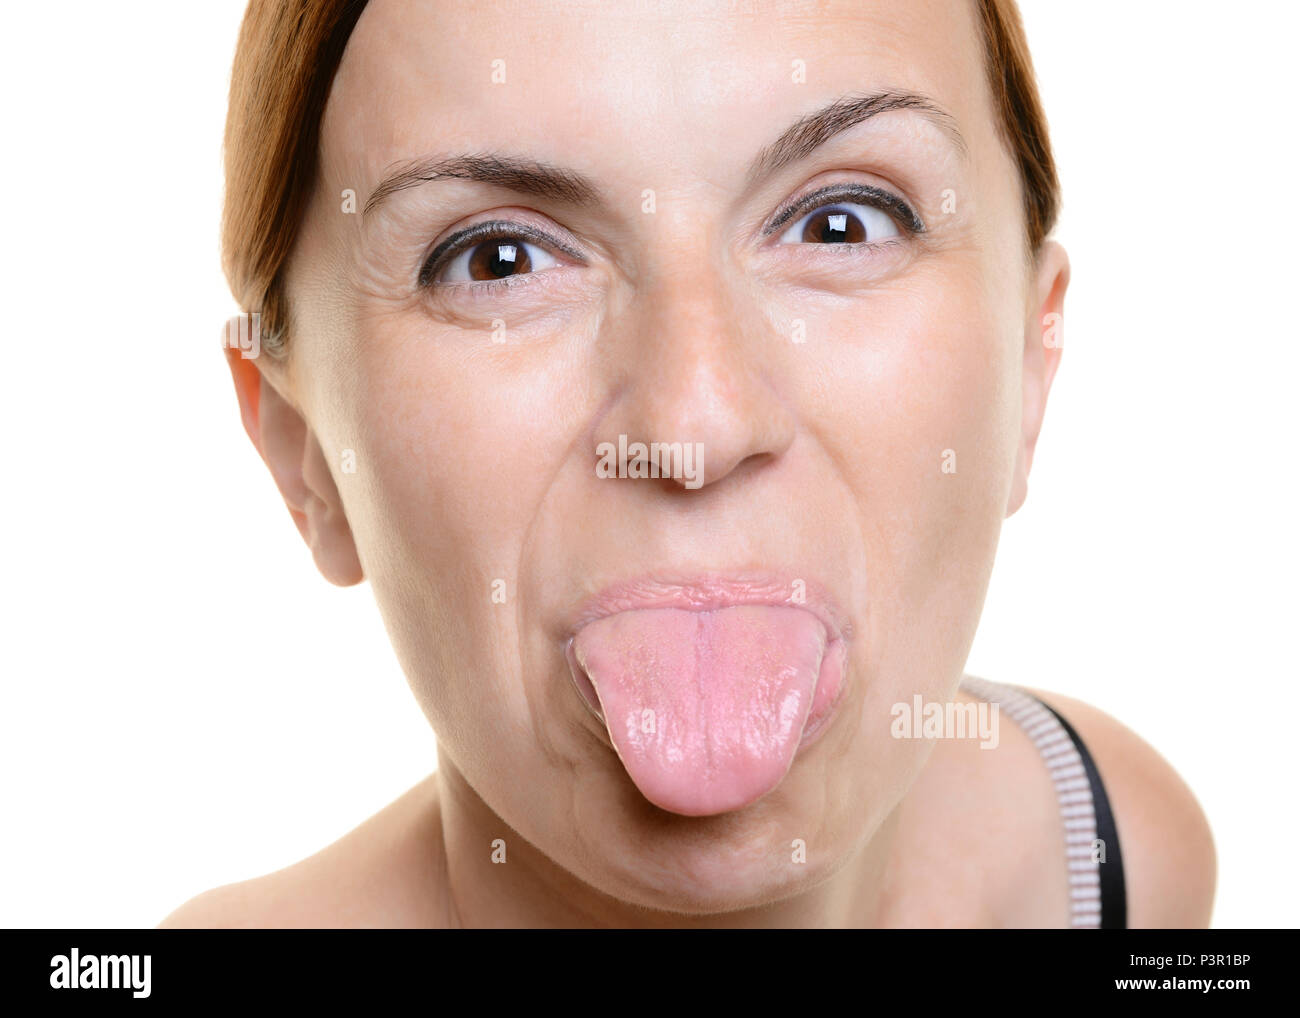 Woman Sticking Her Tongue Out Stock Photo